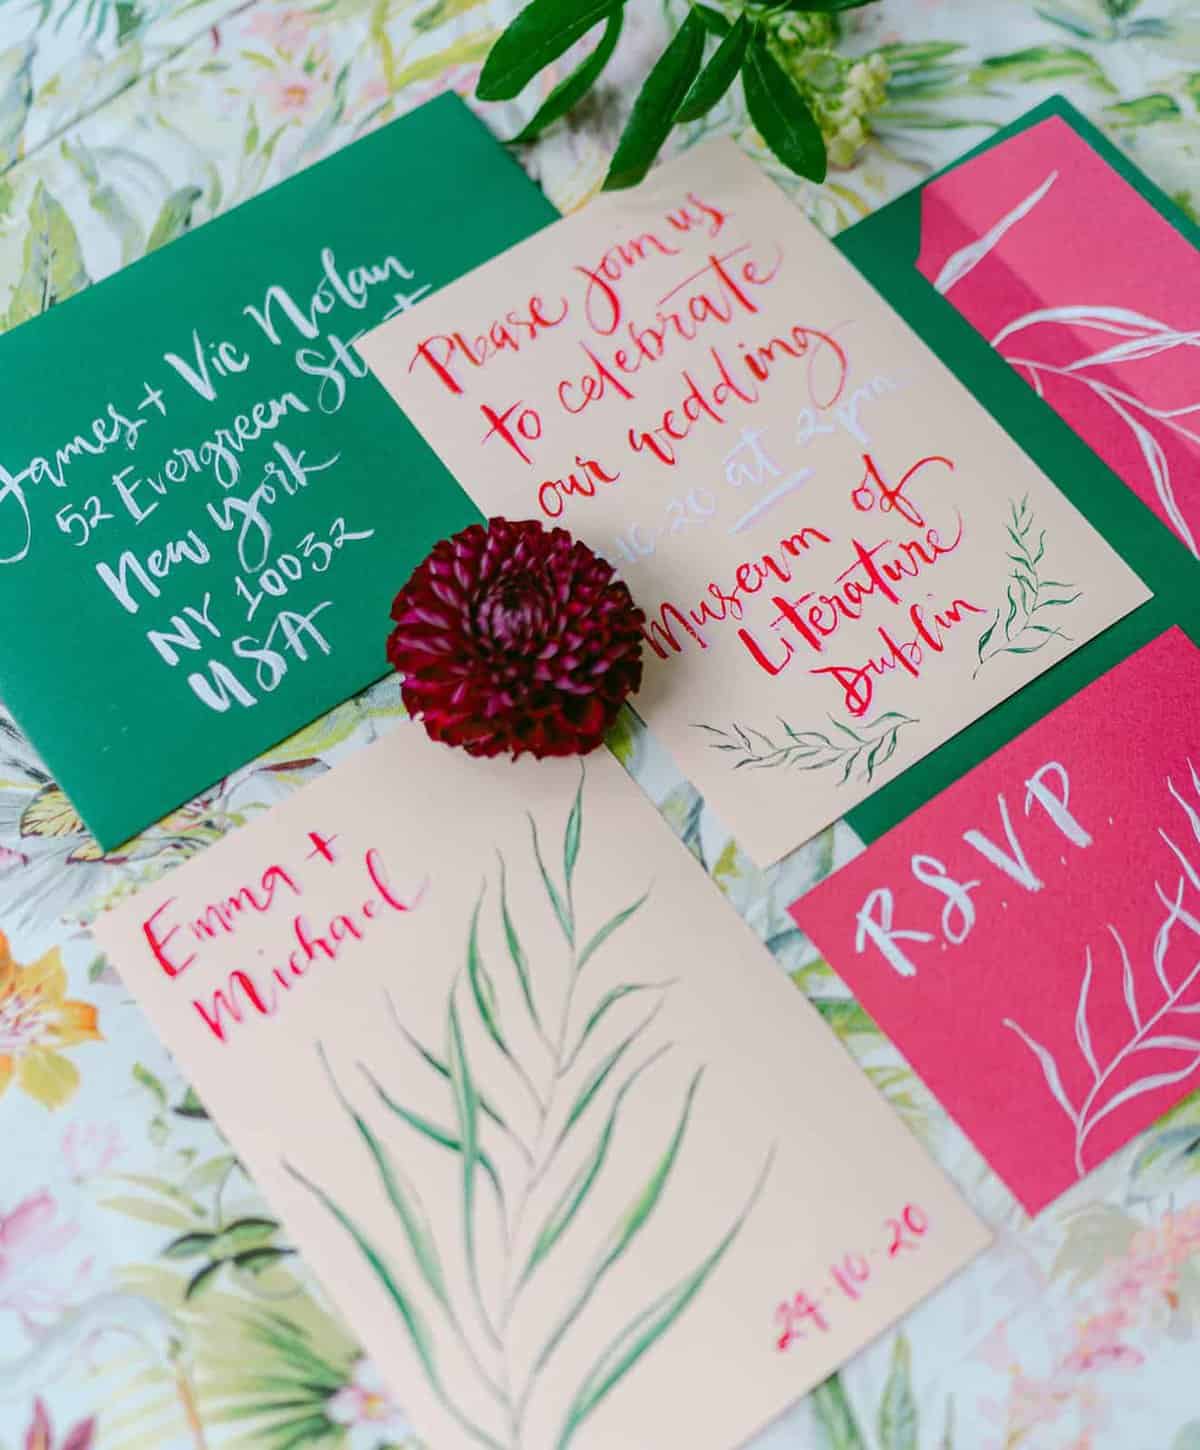 BREAK THE RULES WITH THIS PLAYFUL PINK WEDDING INSPO!